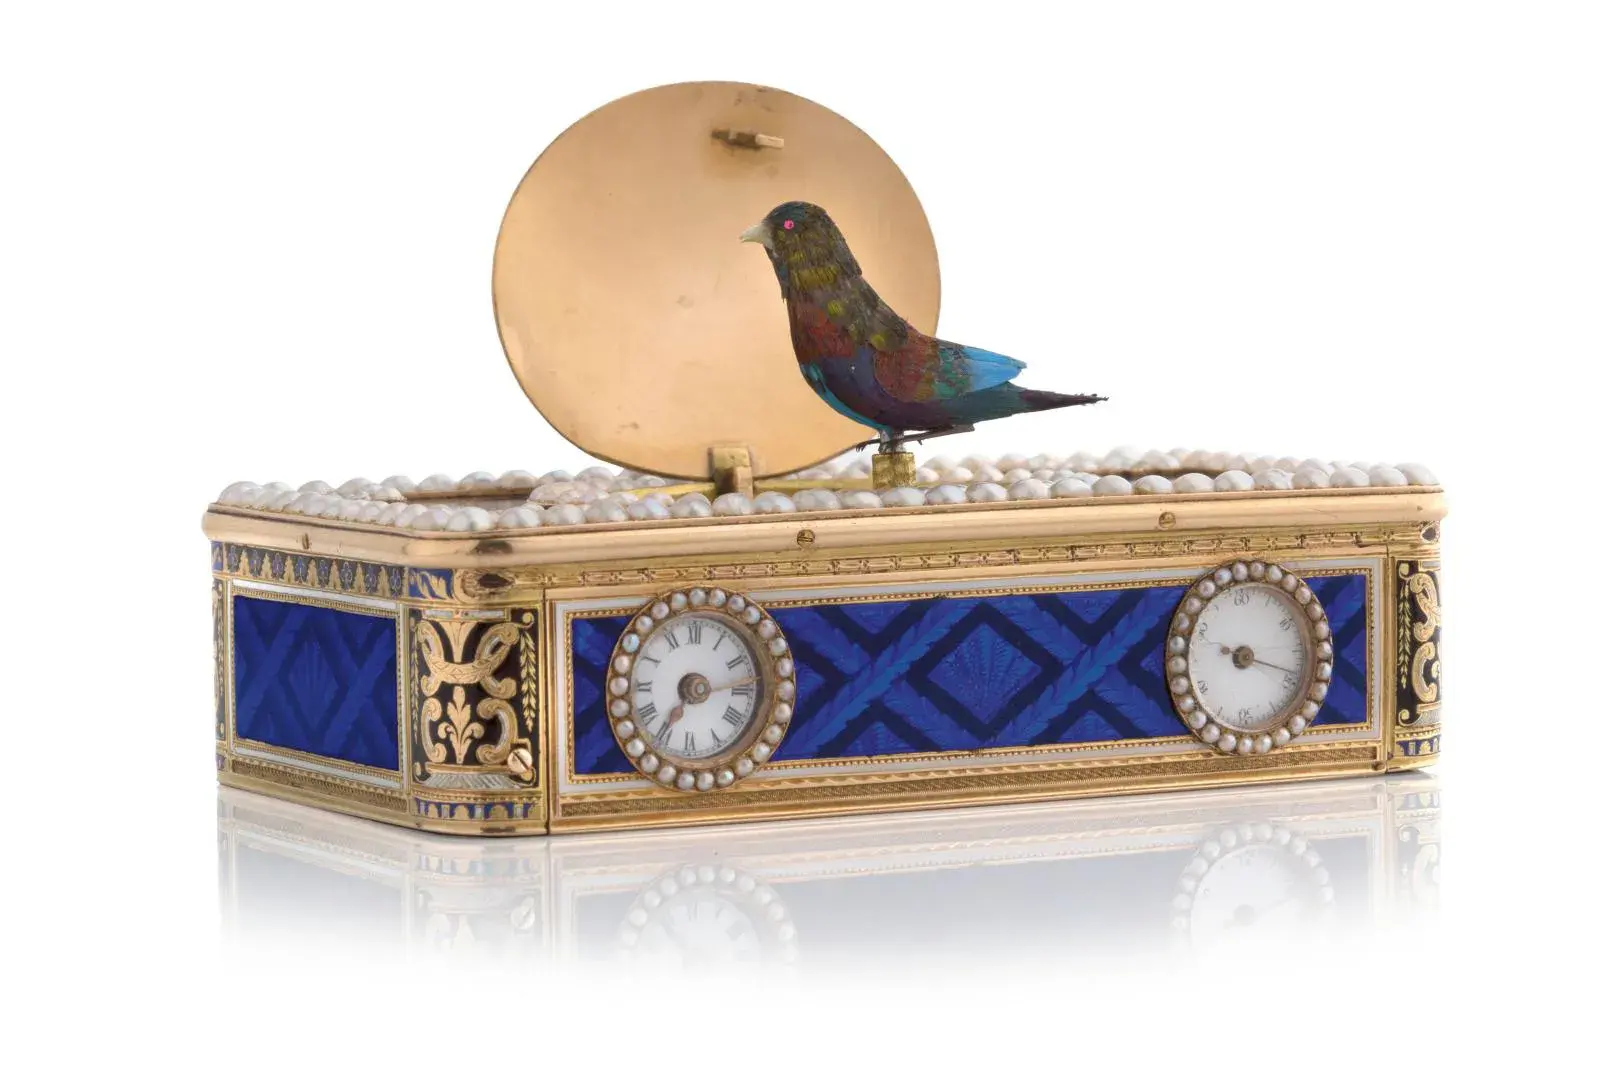 Swiss work attributed to the Rochat brothers, hallmark of Jean-Georges Rémond, early 19th century, gold, enamel and pearl singing bird box-watch with musical clock movement, painted enamel medallion of “The Warrior’s Return”, 2.5 x 9.5 x 5.7 cm/0.79 x 3.5 x 1.9 in., gross weight 368 g/12.9 oz. Neuilly, September 28, 2022. Aguttes auction house.
Sold for €328,980